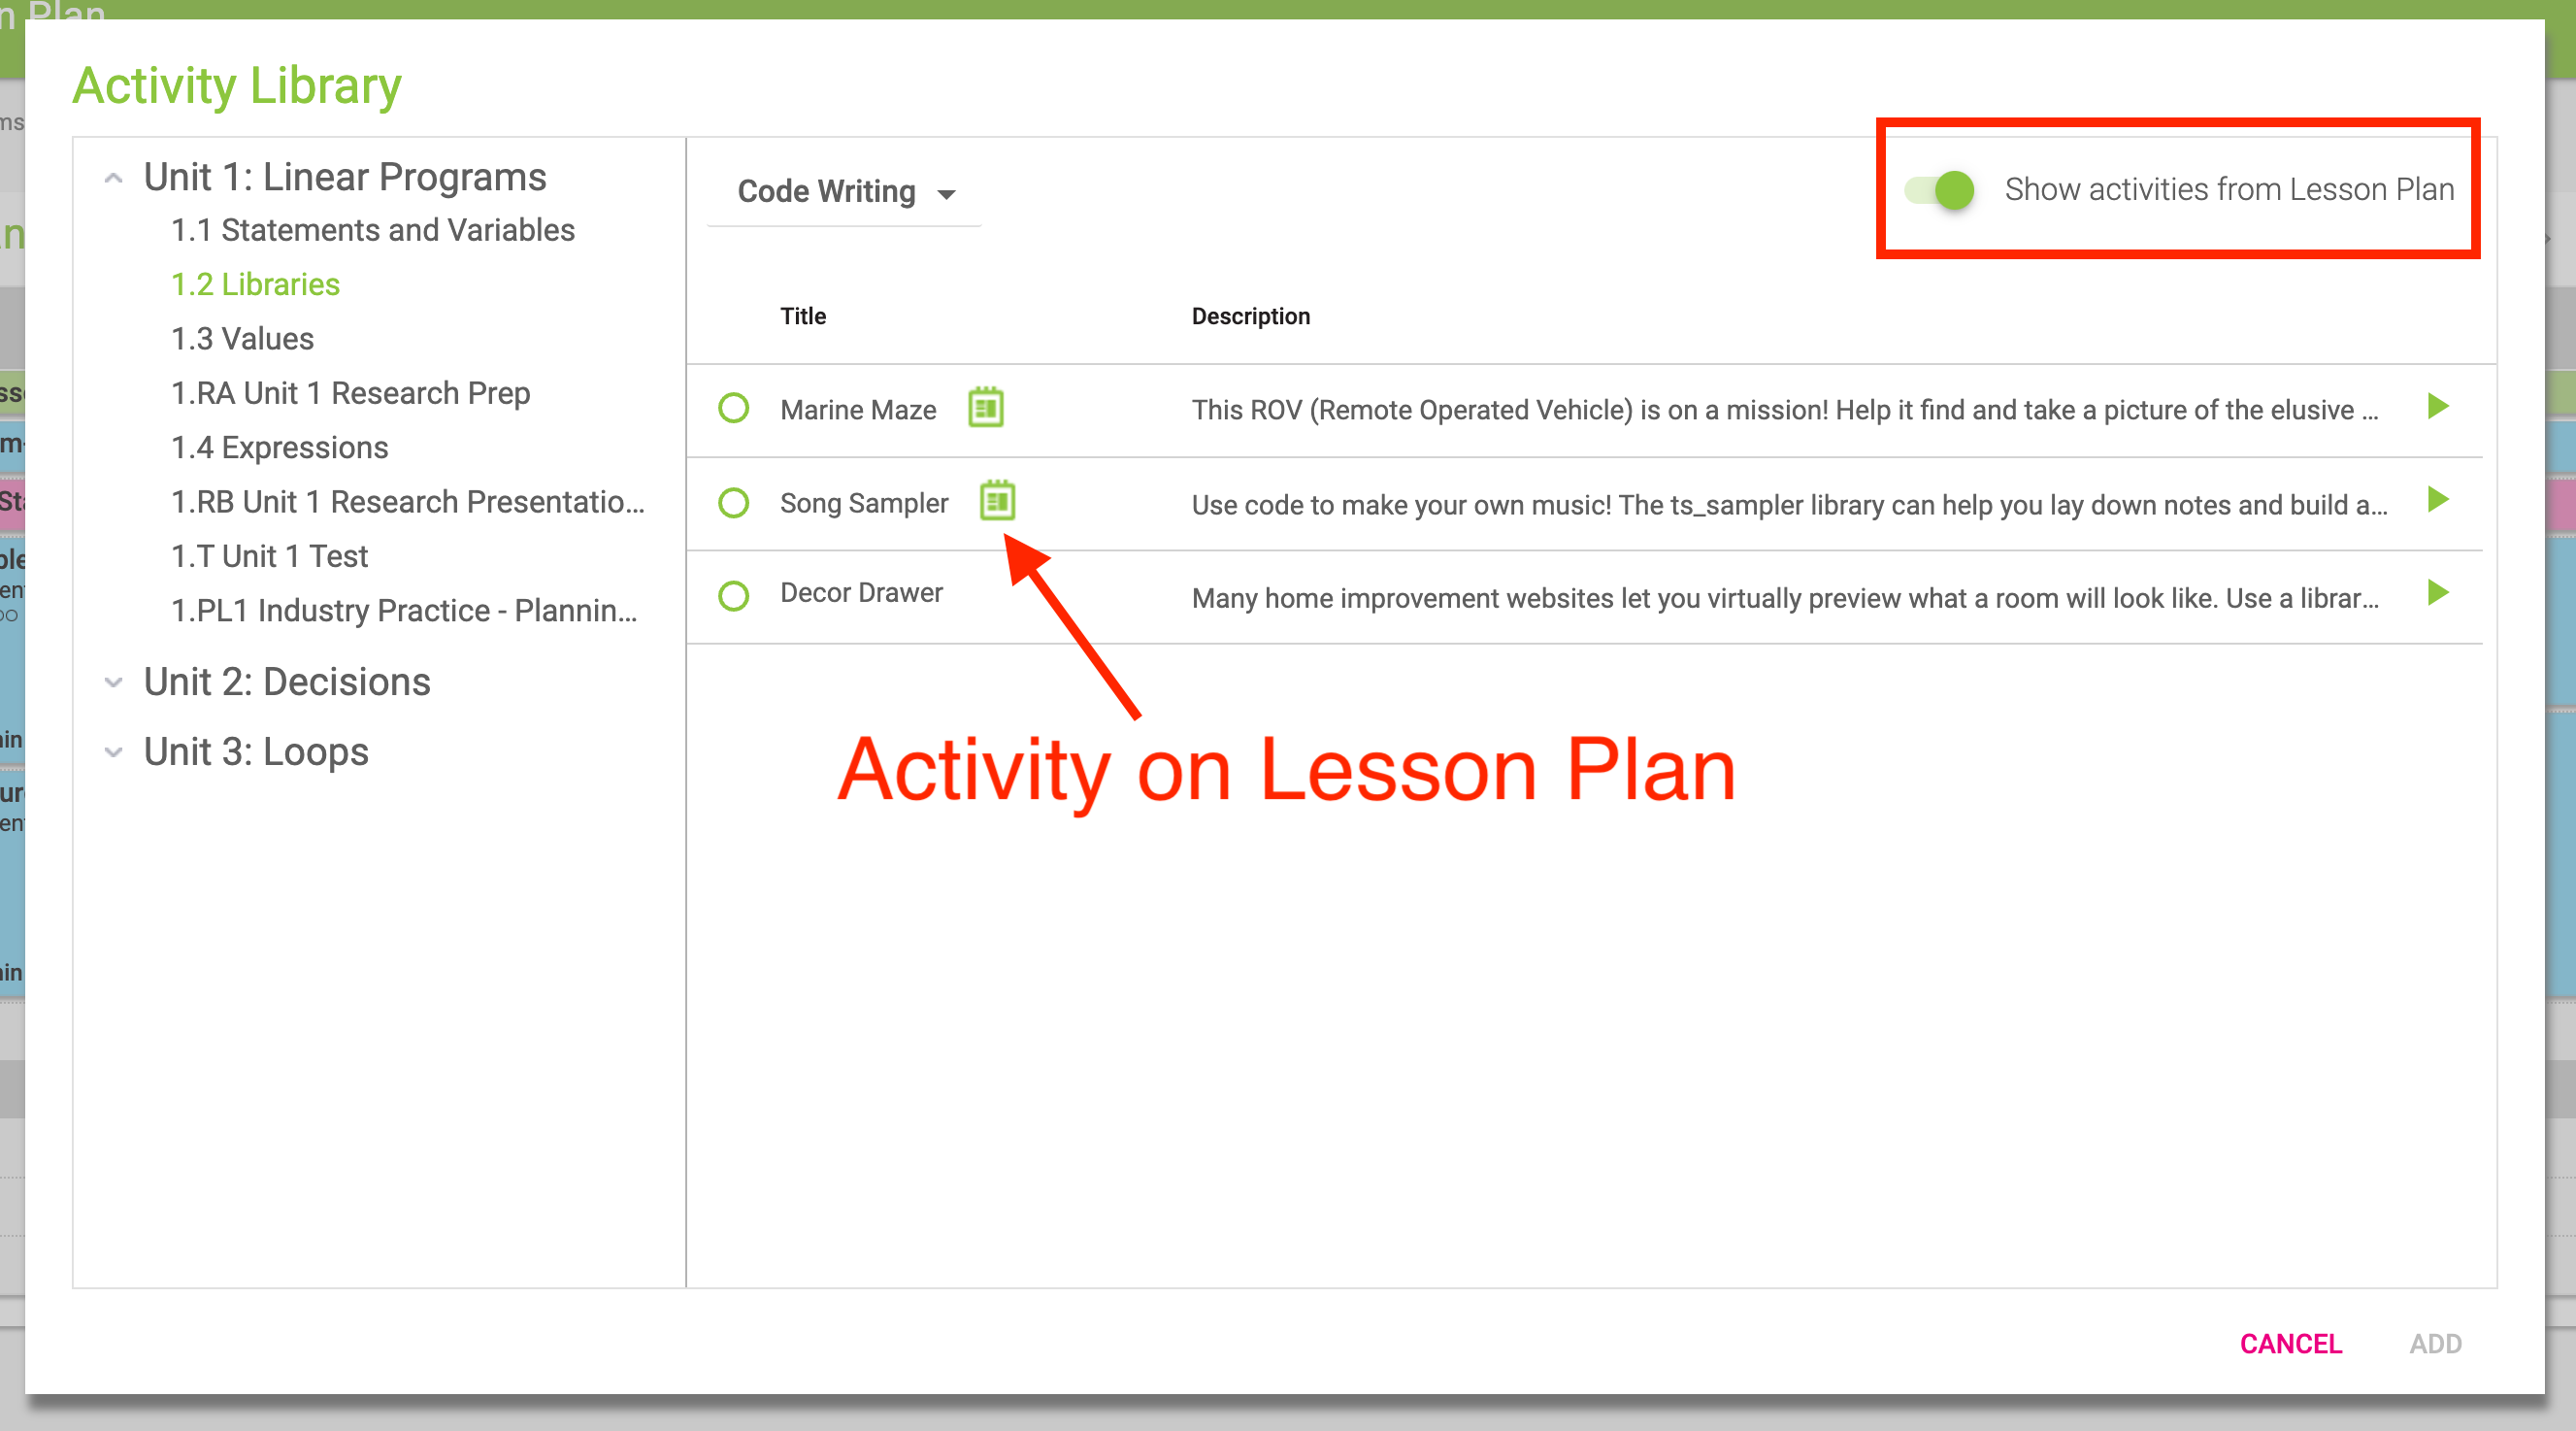 Show_activites_from_Lesson_Plan_On.png